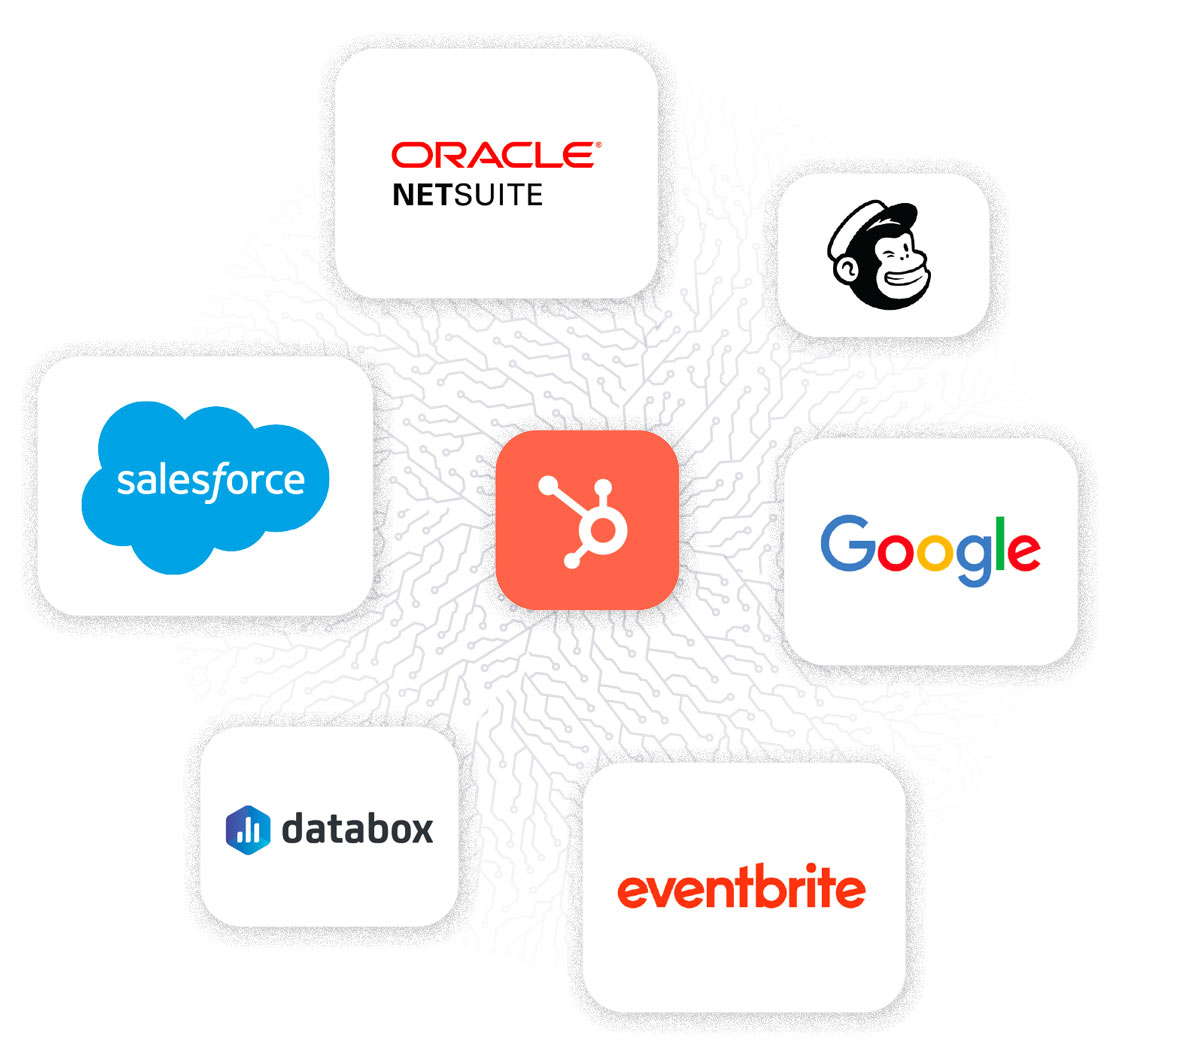 HubSpot Sprocket logo surrounded by other tech logos including: Oracle NetSuite, Salesforce, Google, MailChimp, databox and eventbrite.